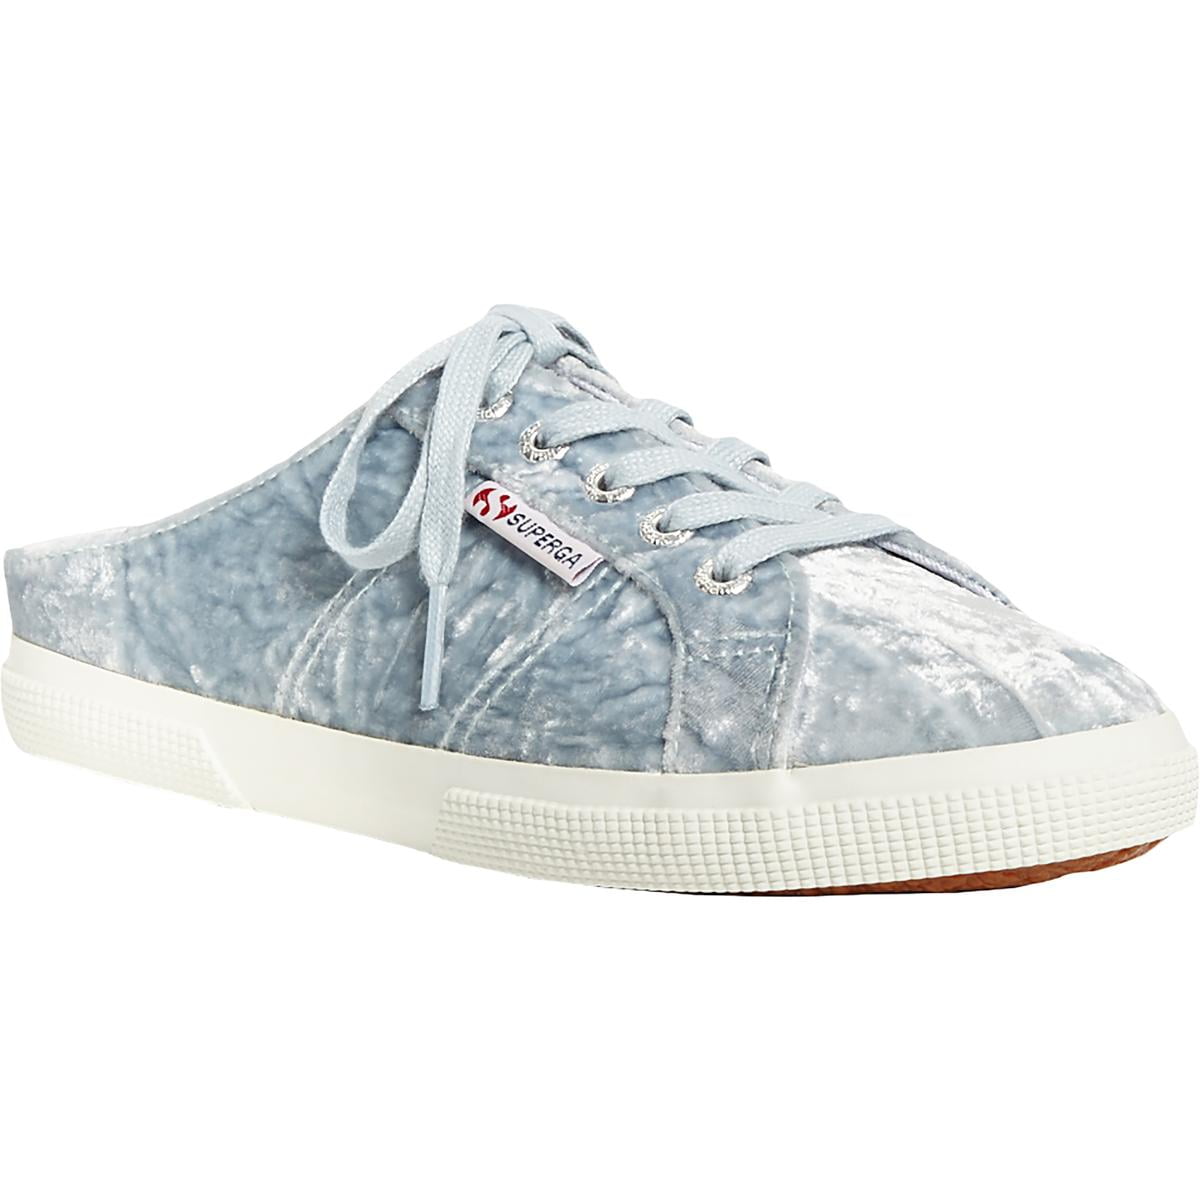 Superga Womens 2750 Sequin Sequined Lace-Up Fashion Sneakers Shoes BHFO 4975 